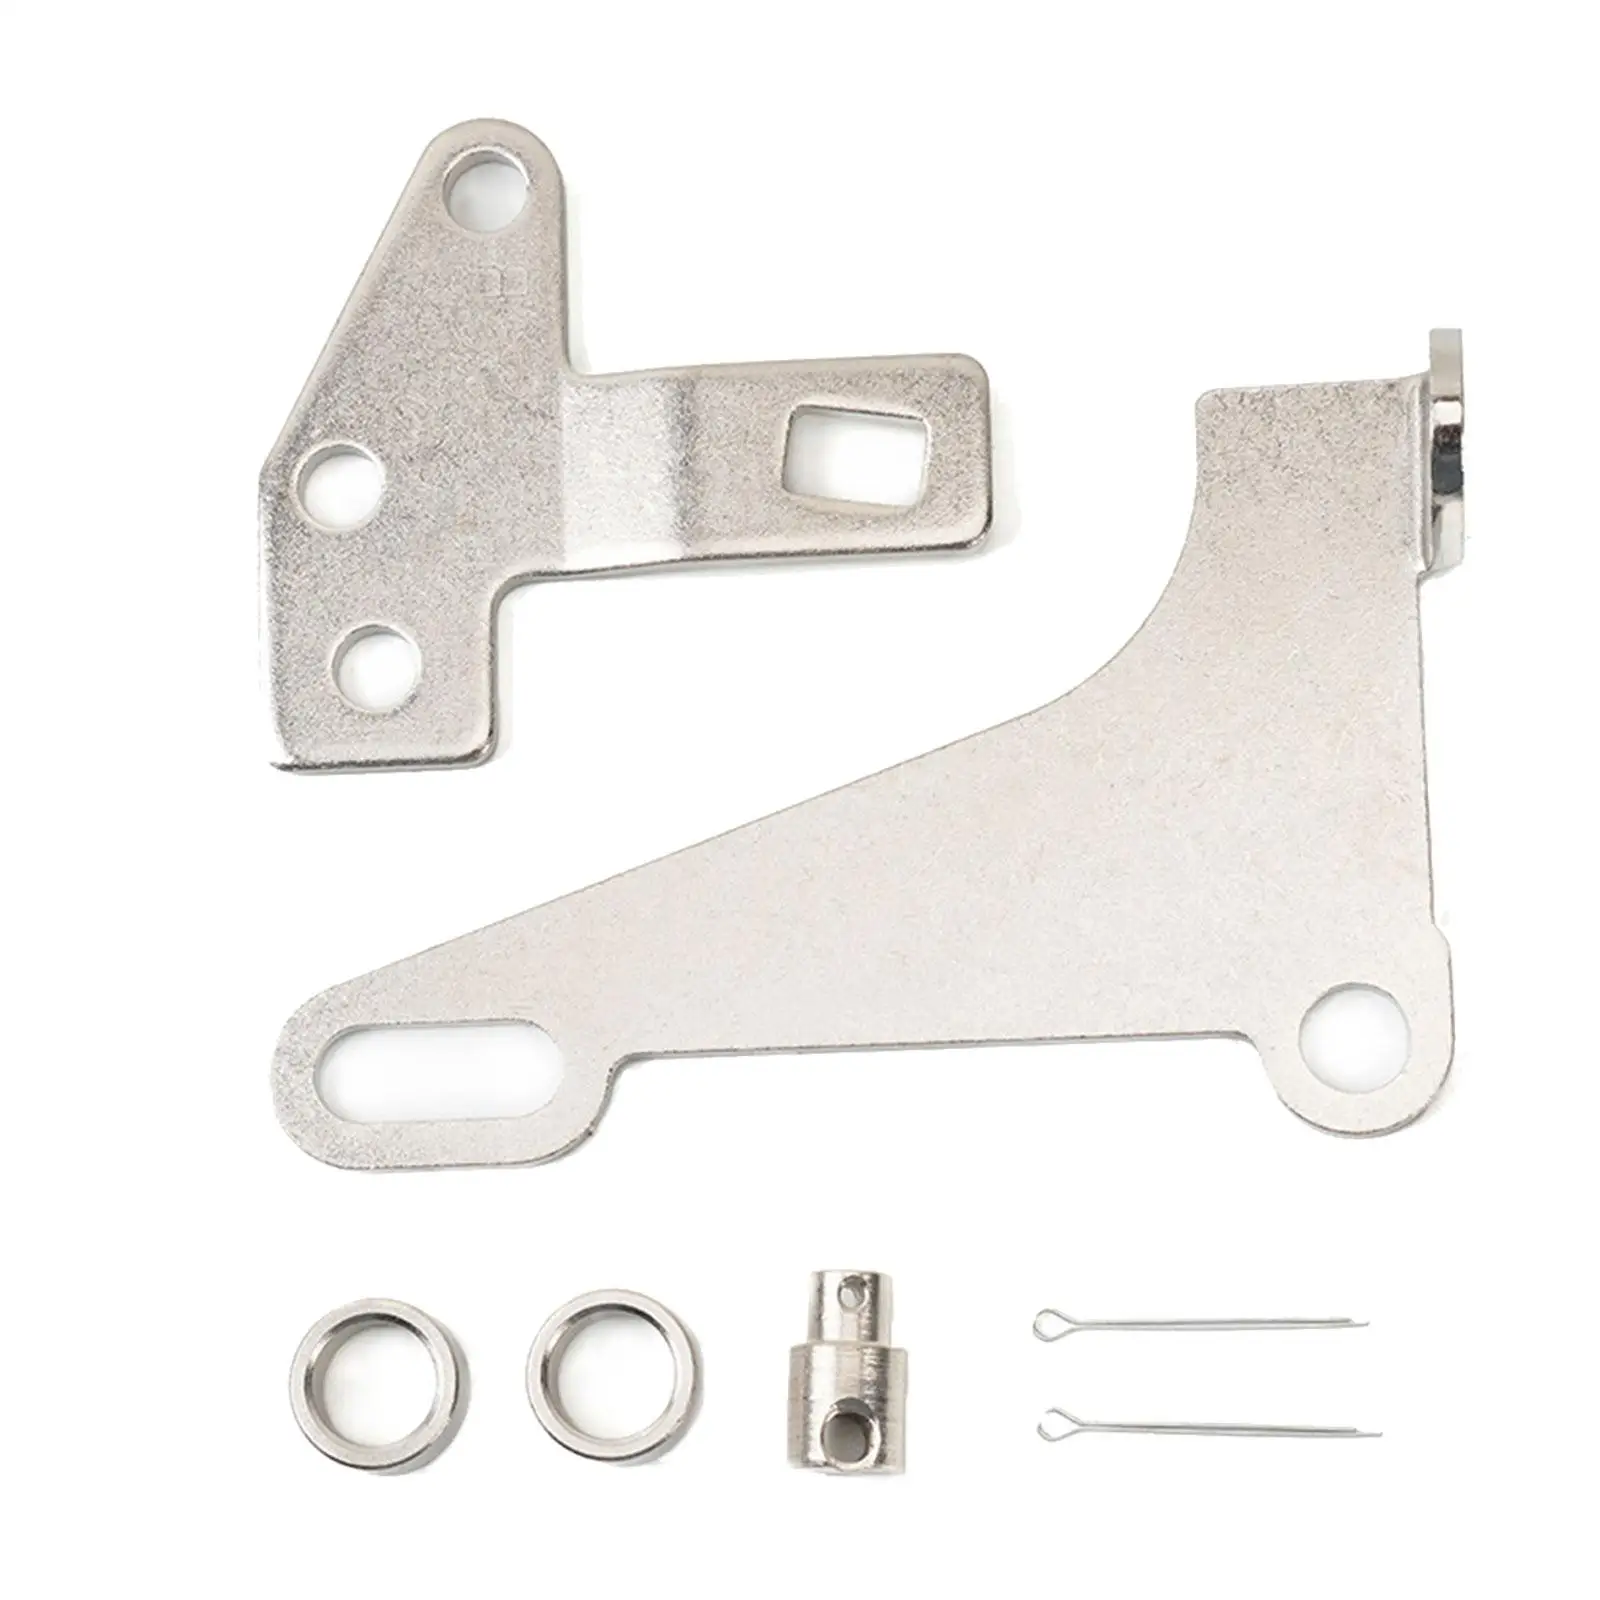 Bracket and Lever Kit Repair Durable Assembly Car Accessories for GM